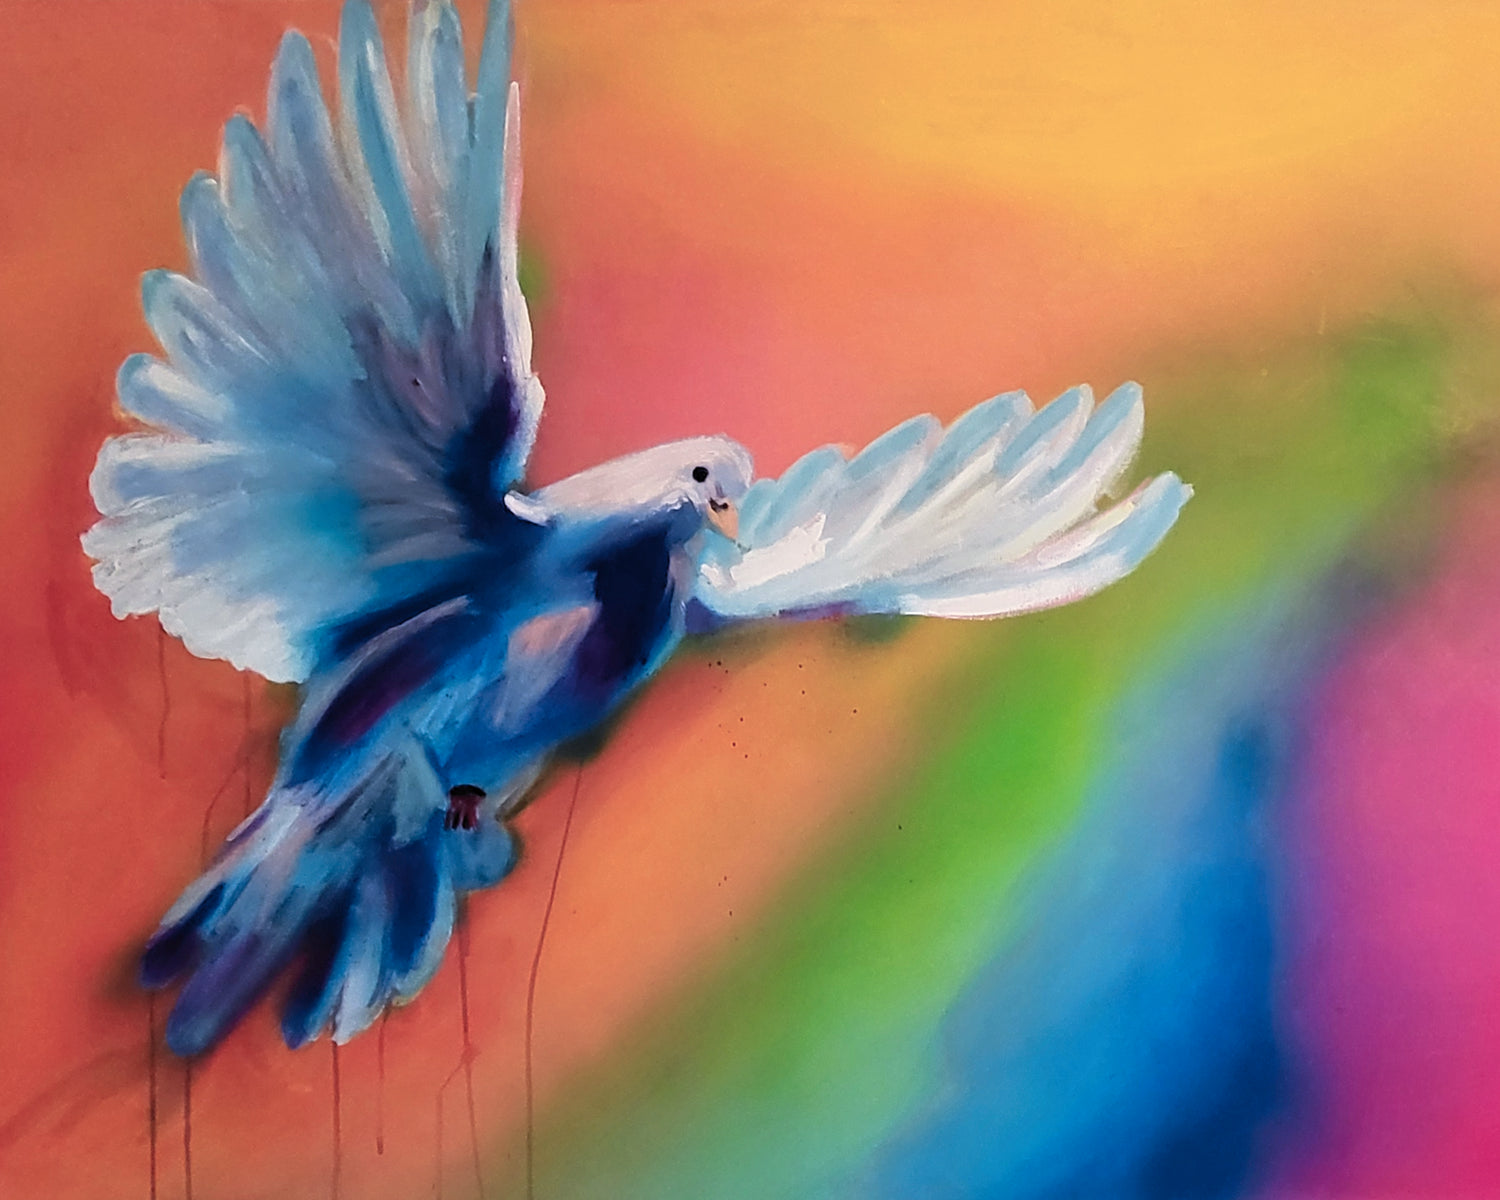 Painting of pigeon in white, purple, and blue with wings open over a vibrant, rainbow blended background